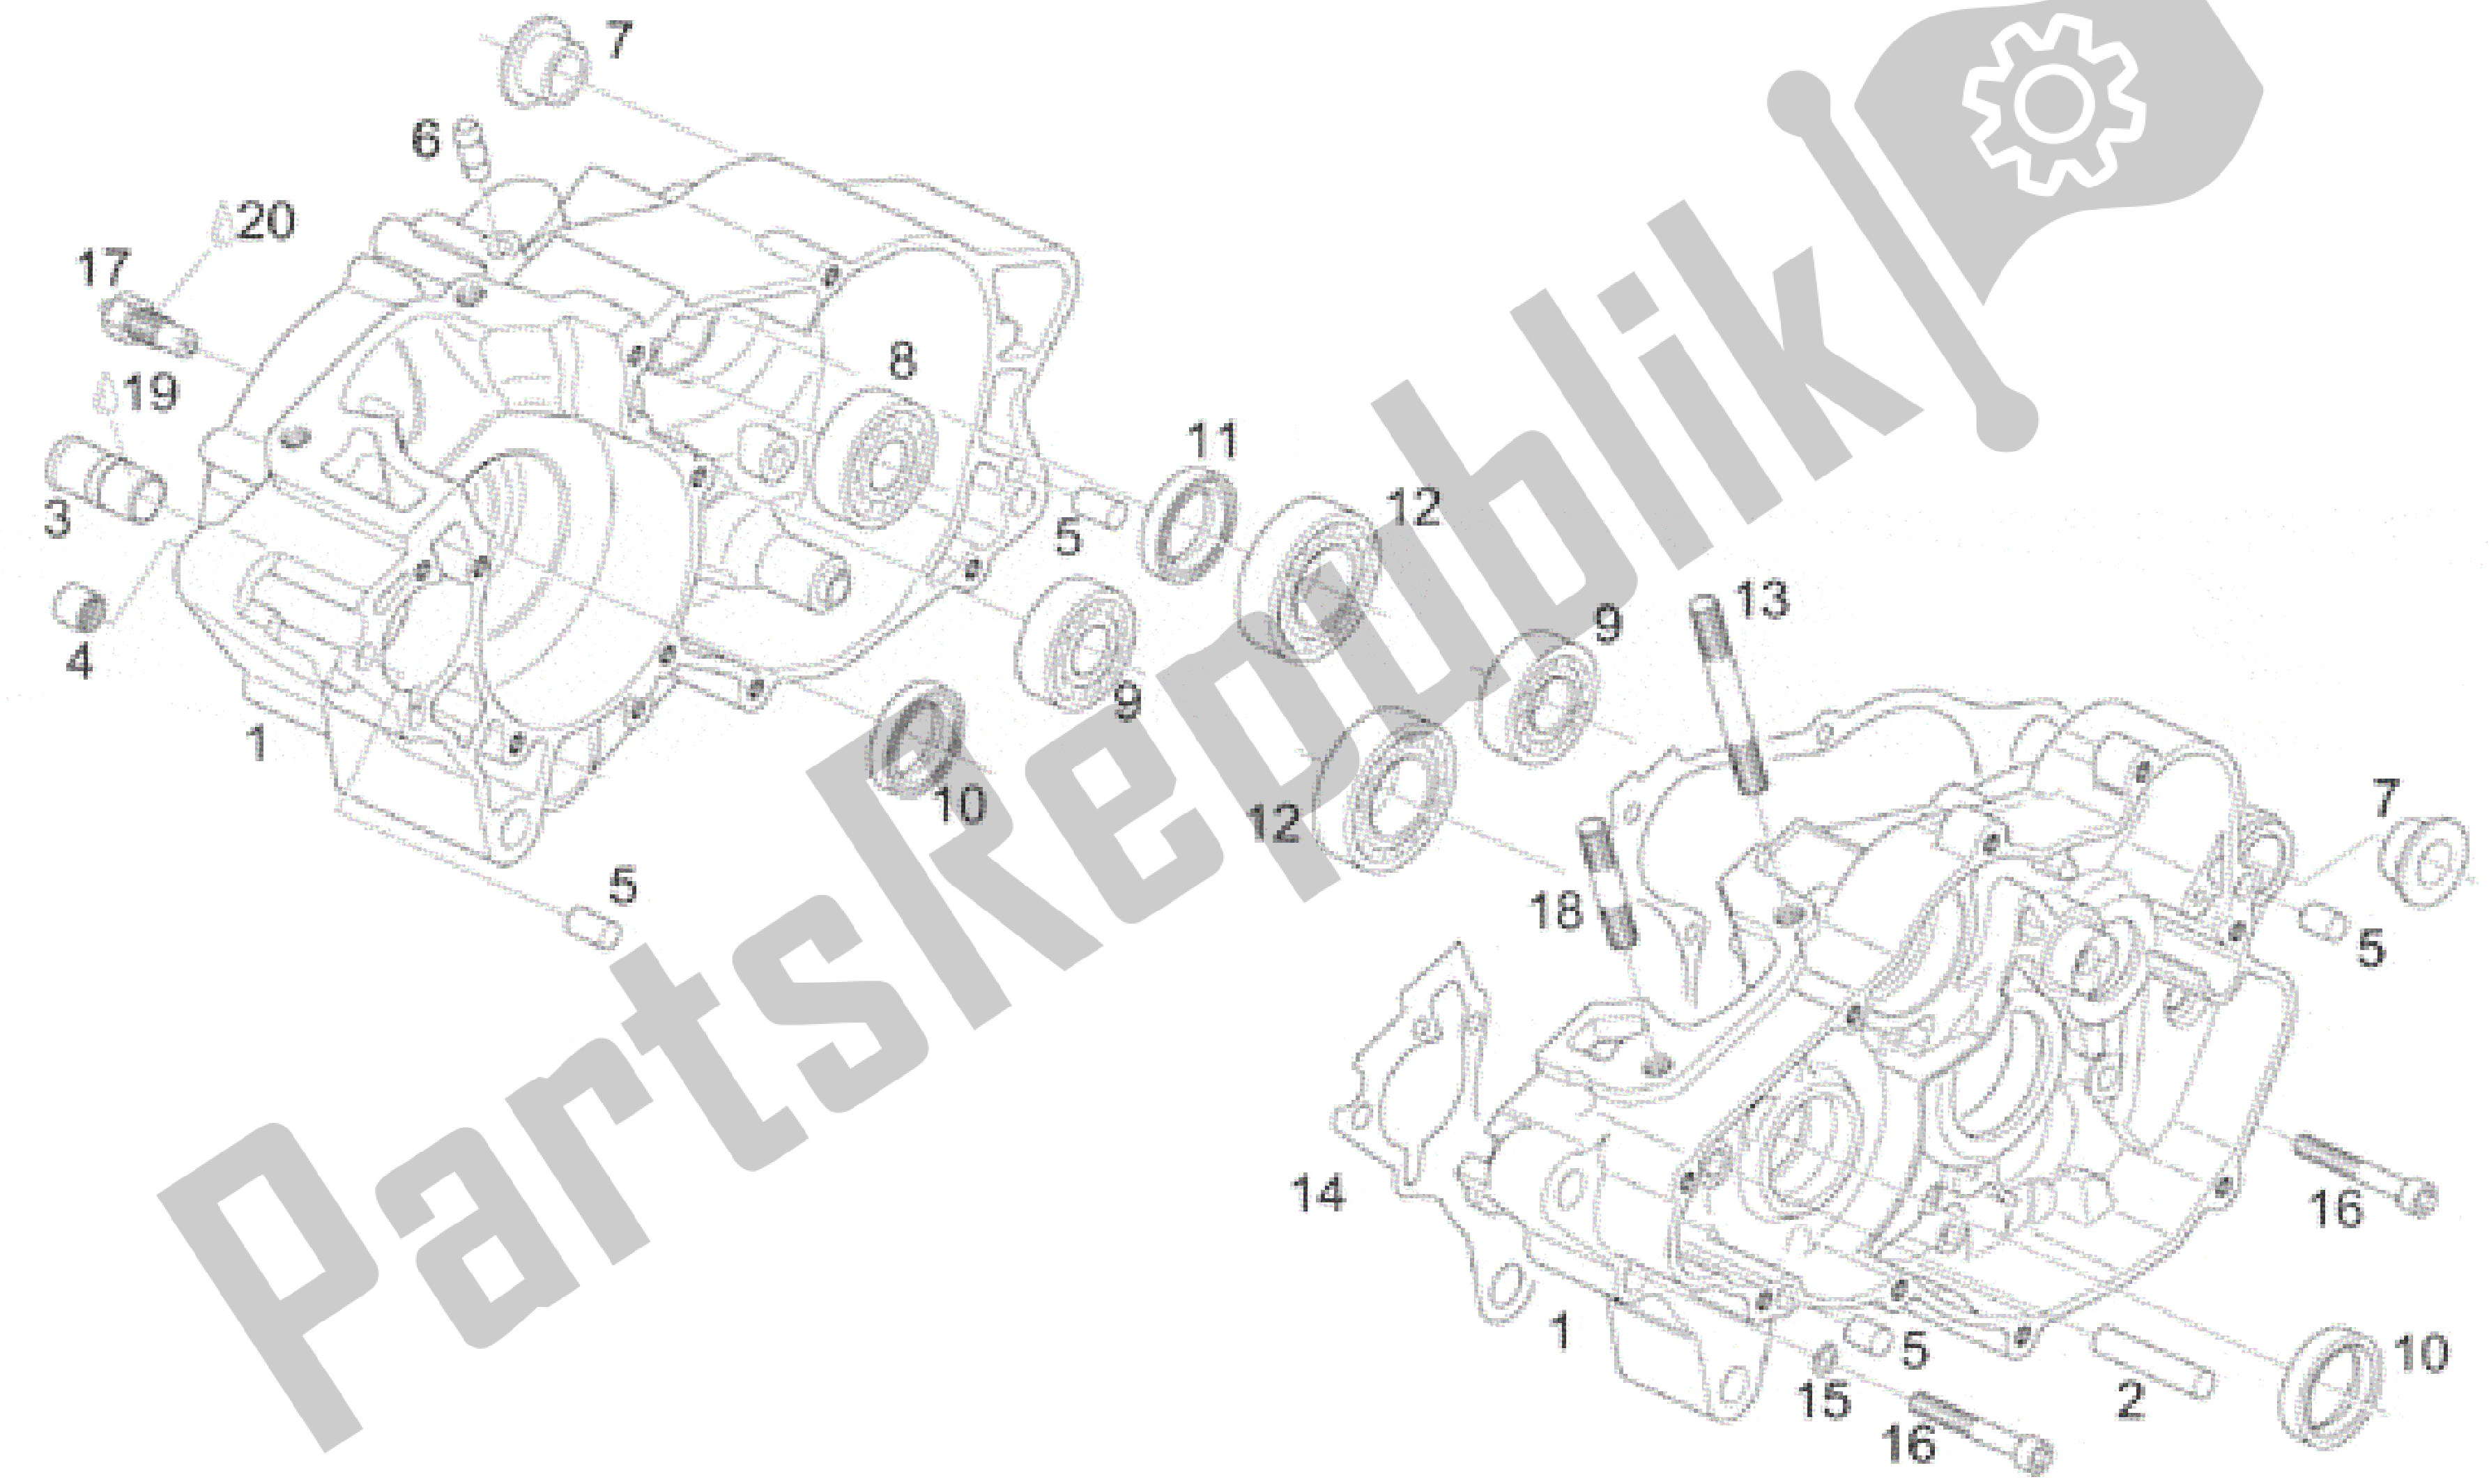 All parts for the Crankcase of the Aprilia RS 125 1996 - 1997